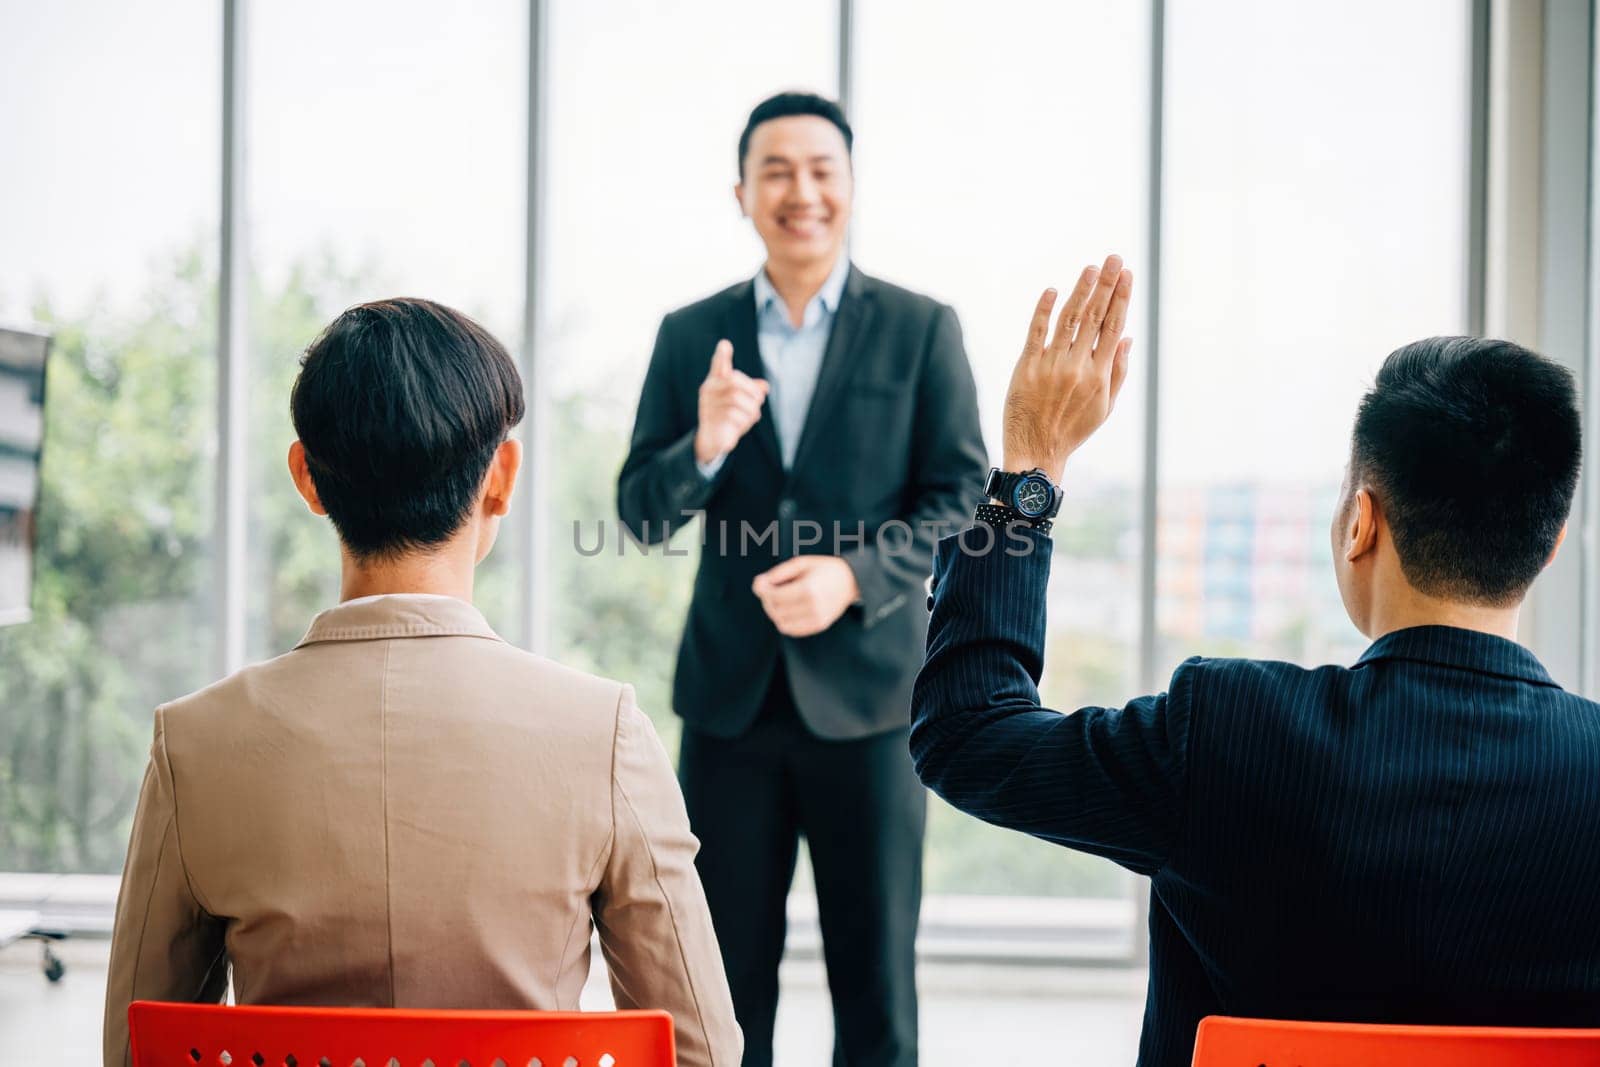 At a corporate event, a diverse audience of businesspeople raises their hands for questions, voting, or volunteering. The scene highlights teamwork and interactive audience participation.